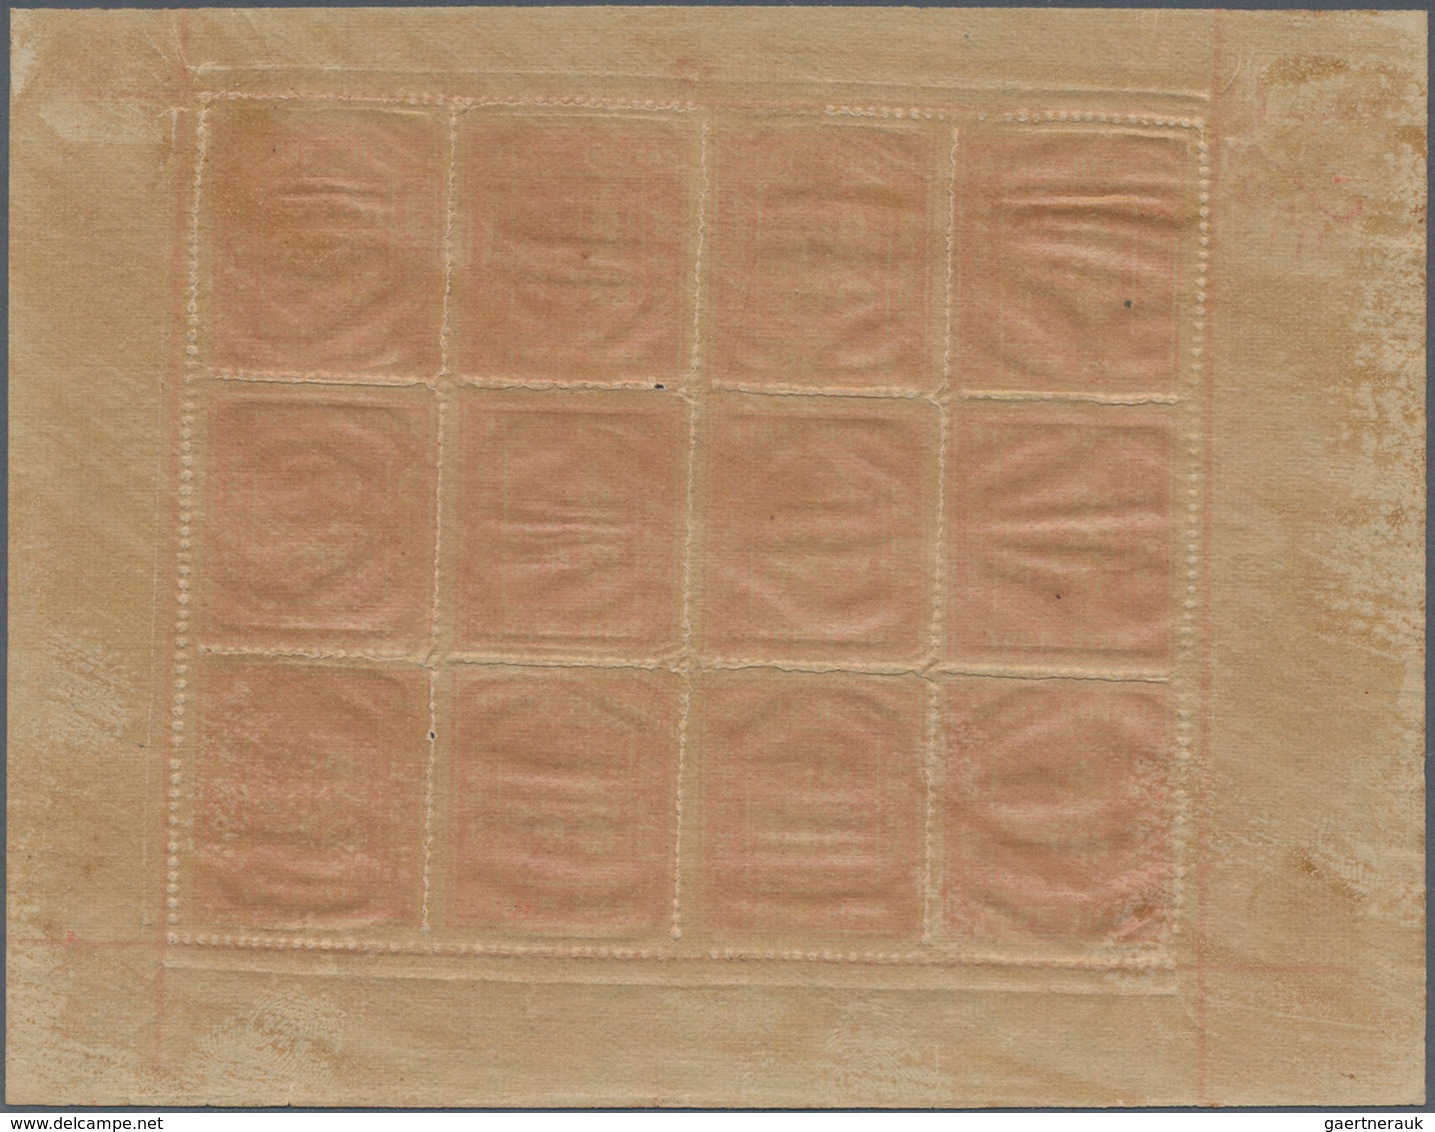 Indien - Feudalstaaten - Jaipur: 1904 Three Complete Sheets Of 12 Of 1a., One In Dull Red, Two In Sc - Other & Unclassified